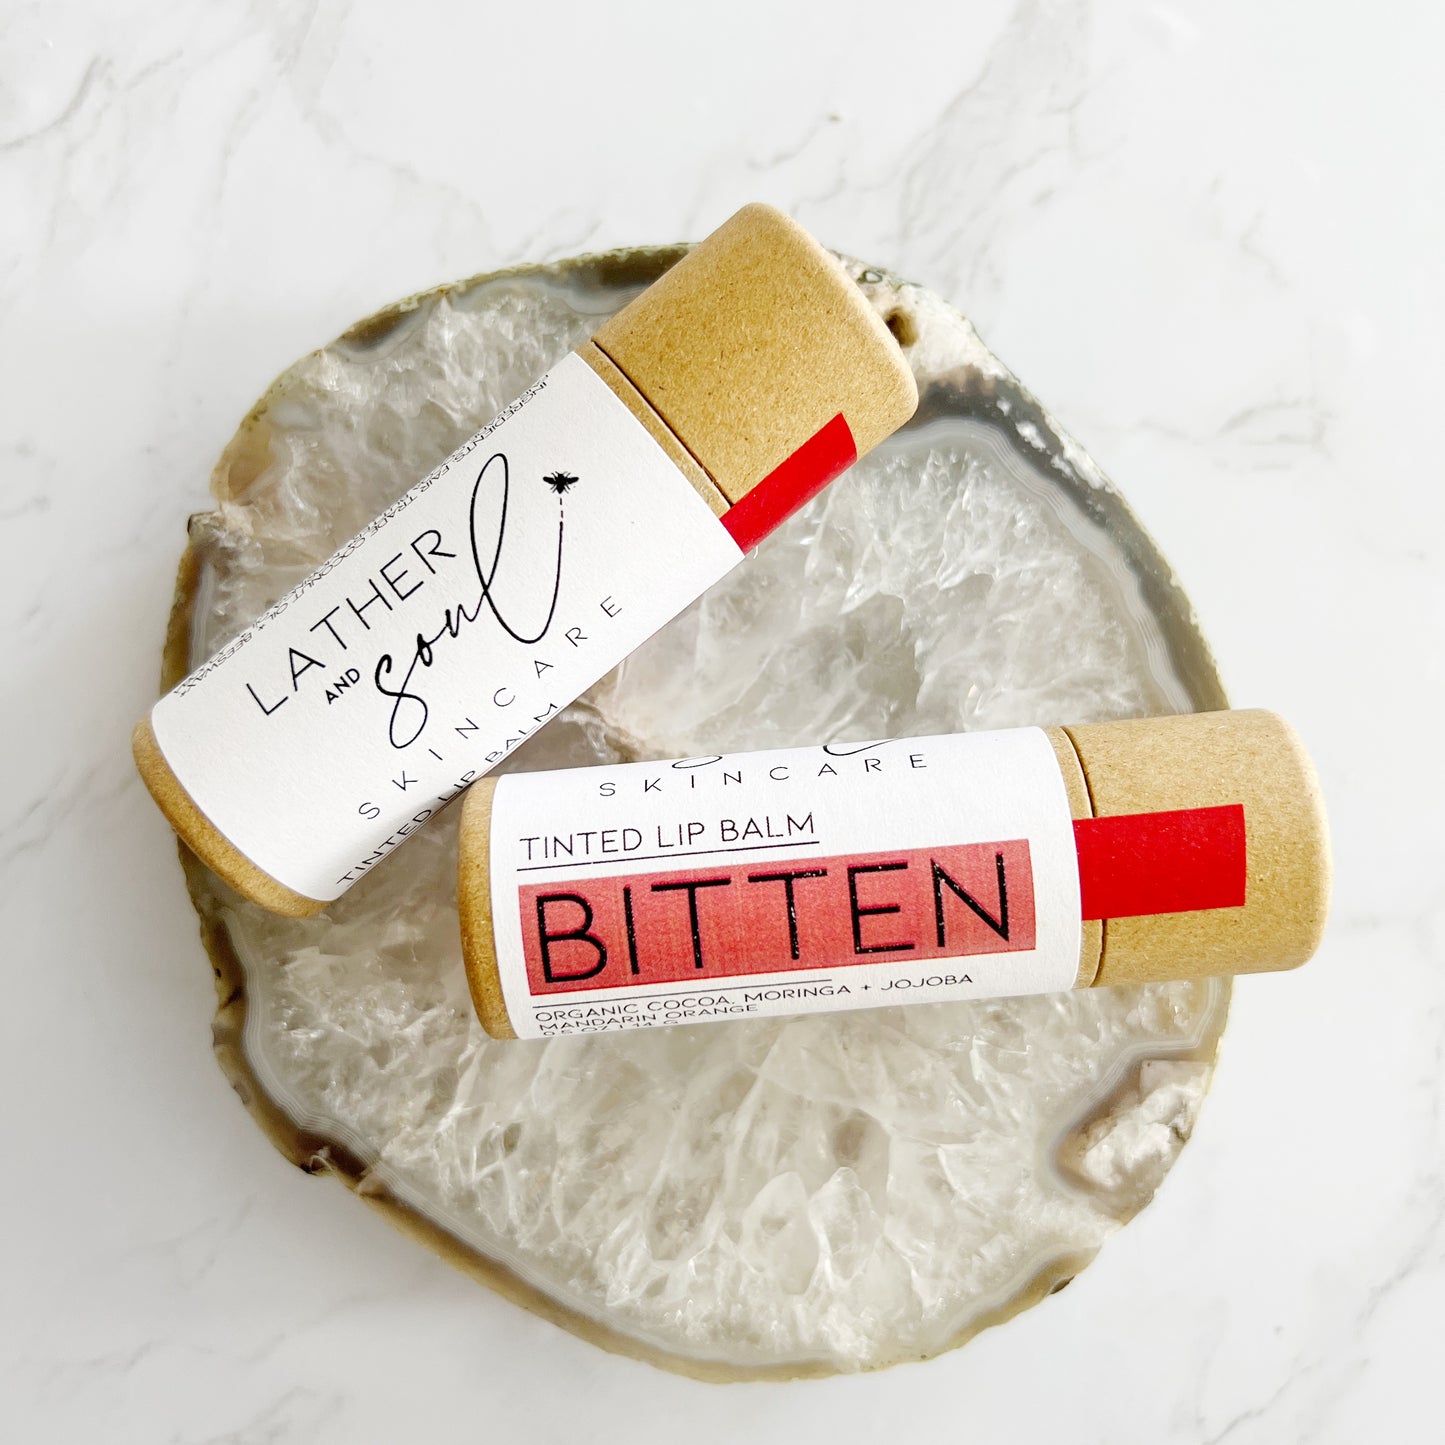 Natural and organic tinted lip balm, "Bitten," in a sheer crimson hue, packaged in eco-friendly paperboard tube.